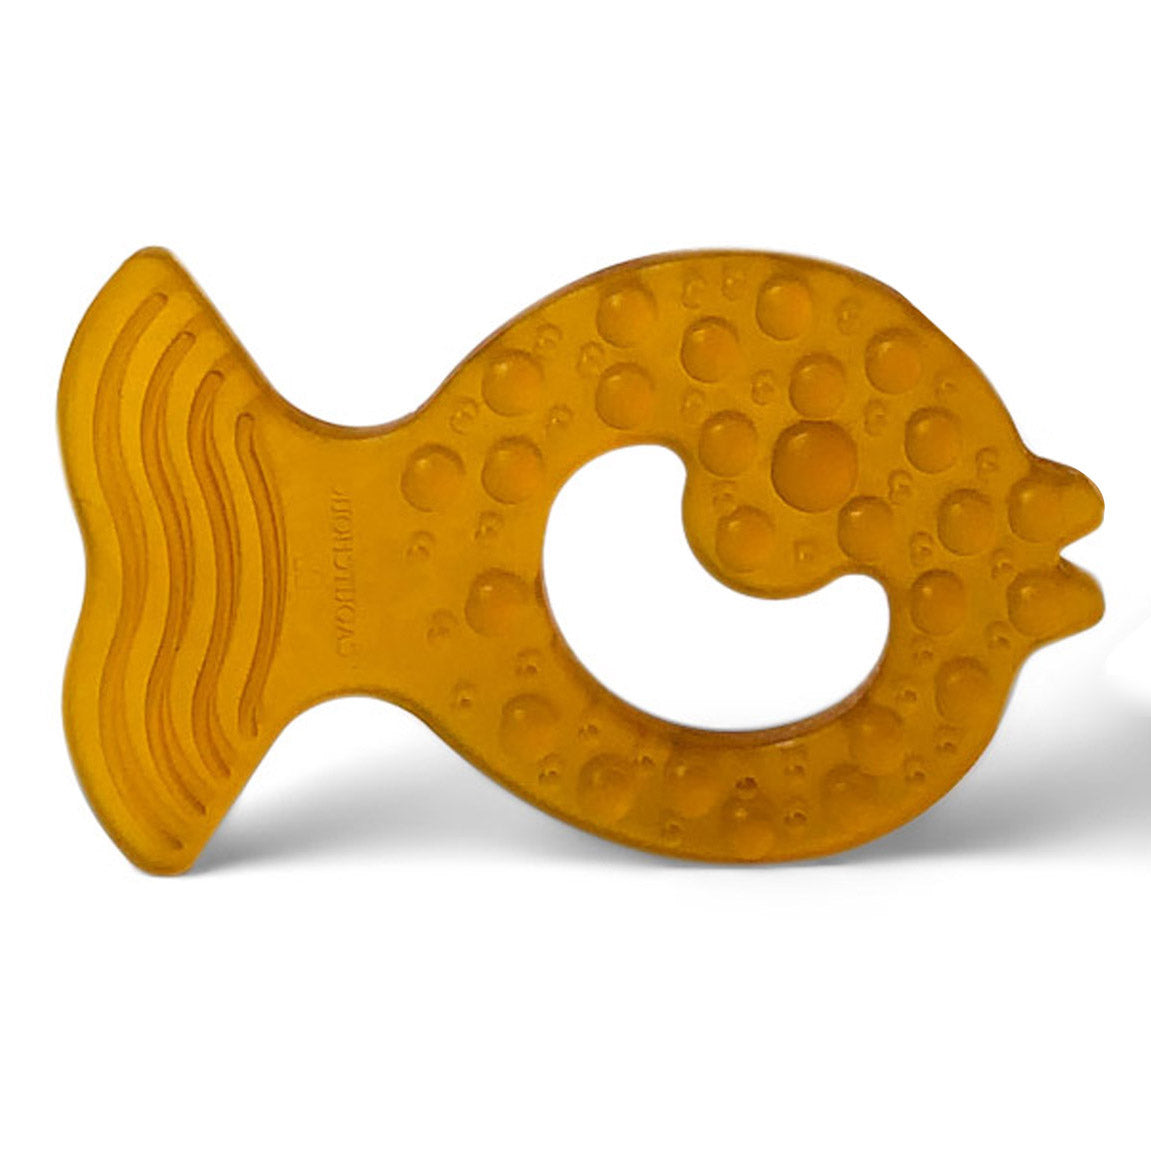 "Natural Rubber Teether" - Fish